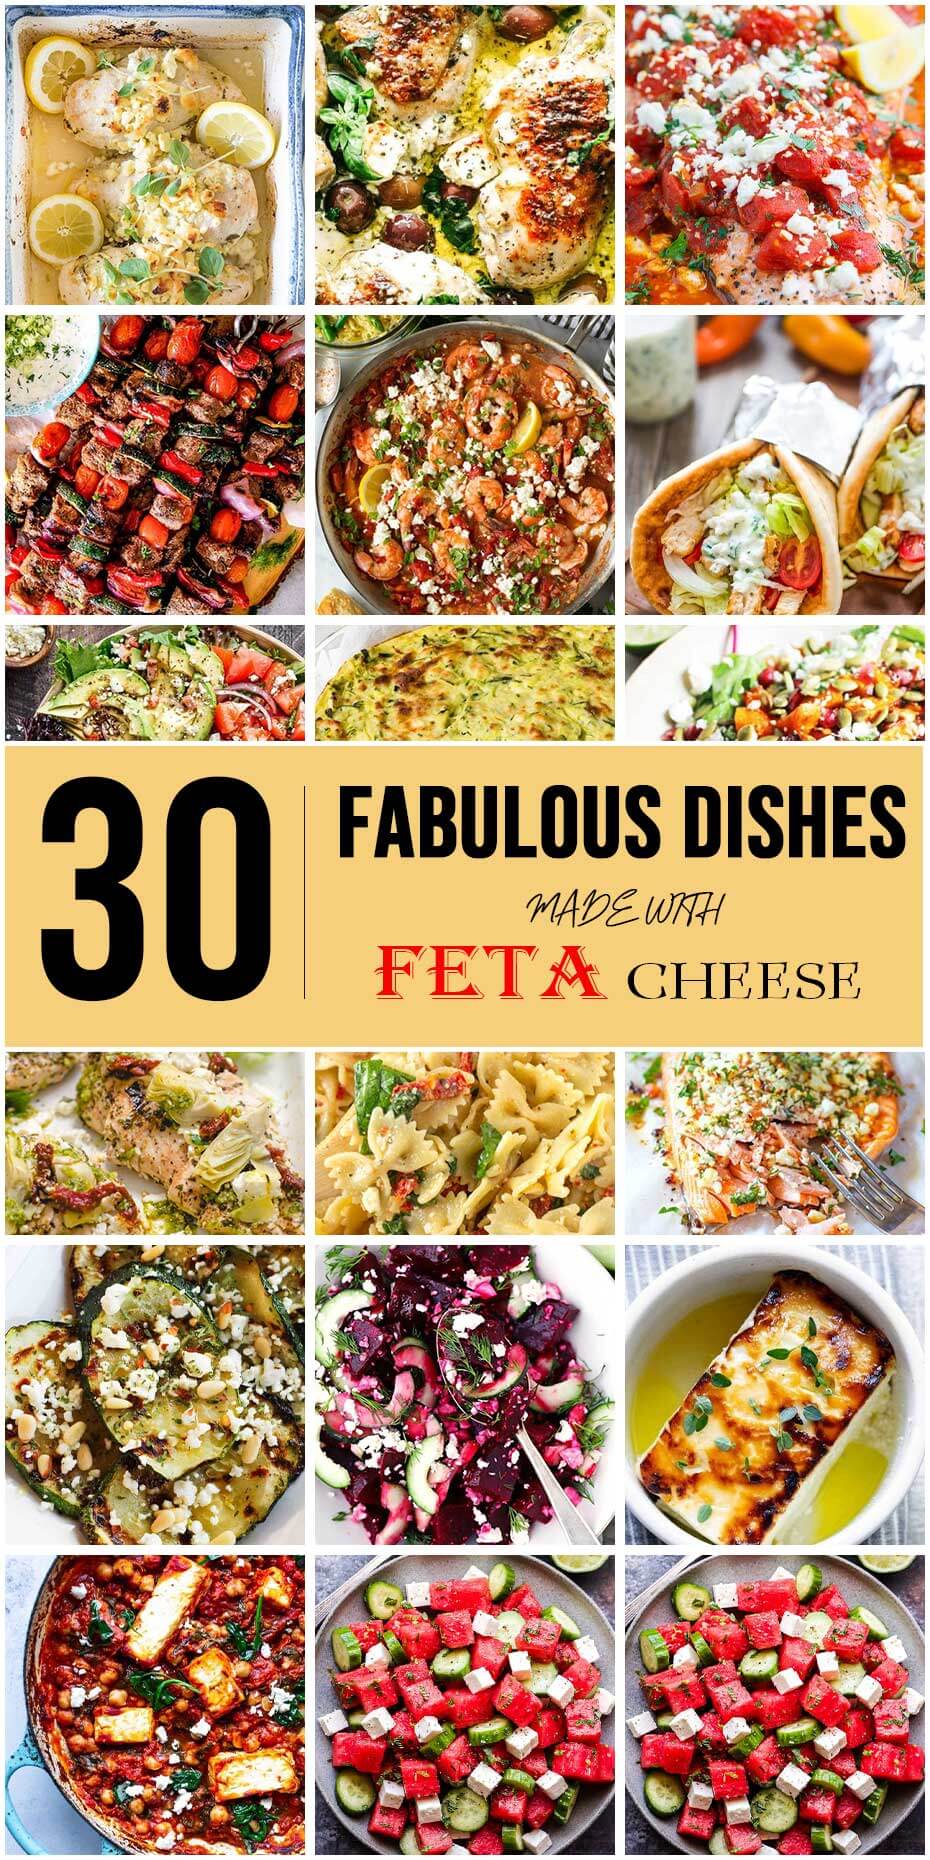 30 Fabulous Dishes Made With Feta Cheese